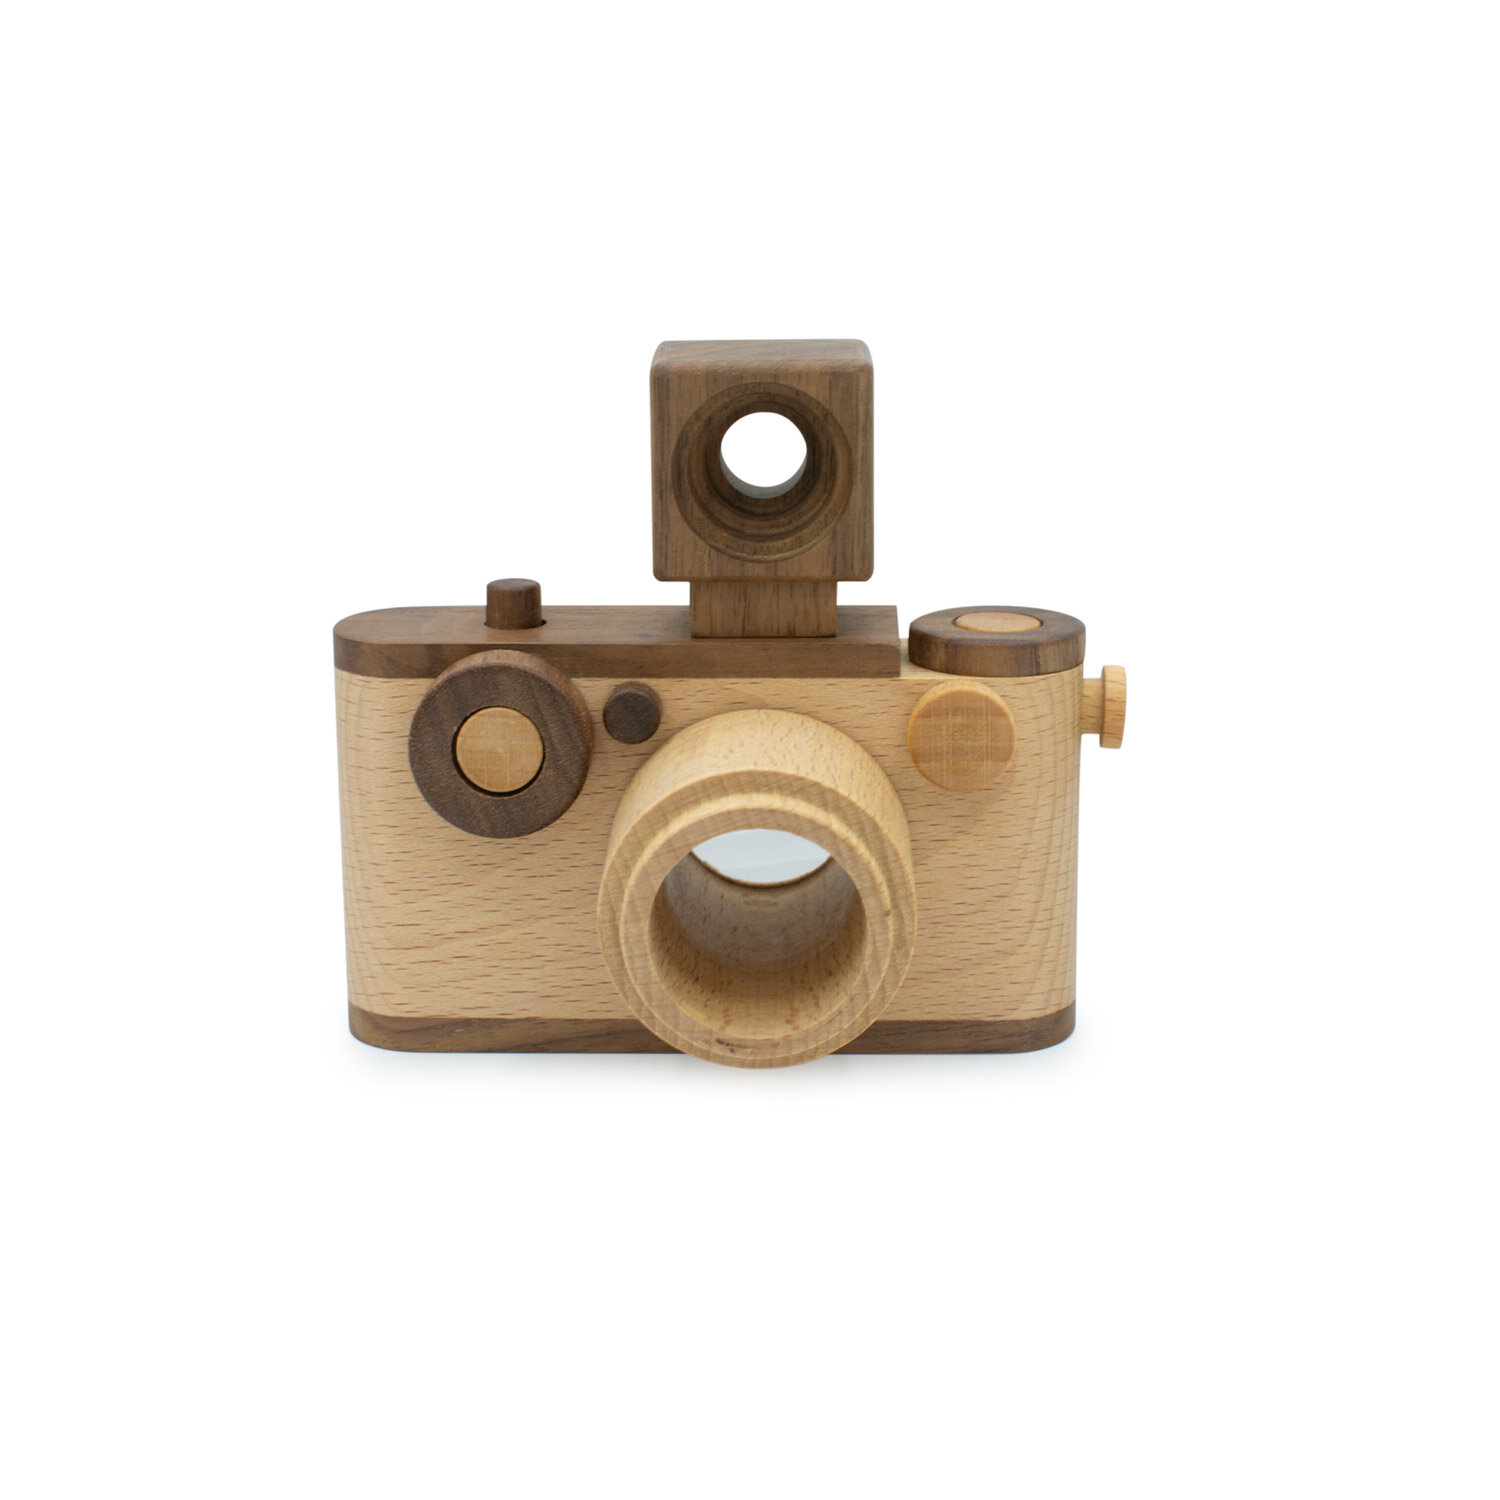 Wooden Toy 35mm Camera (for kids!)